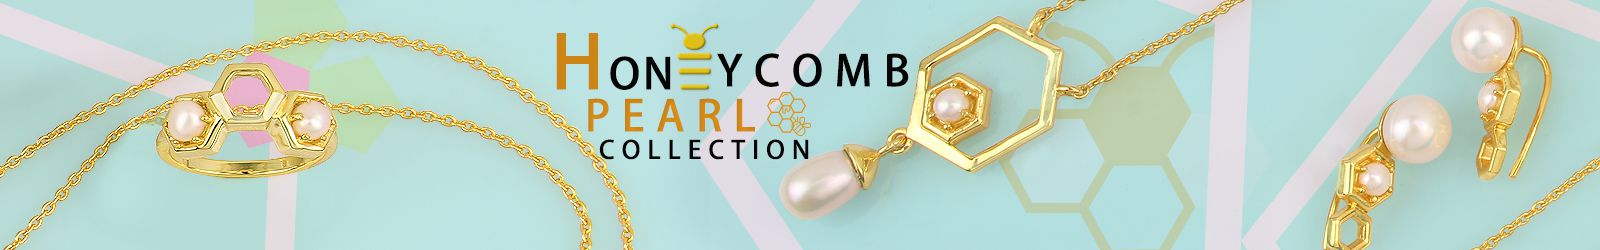 Honeycomb pearl jewelry manufacturer